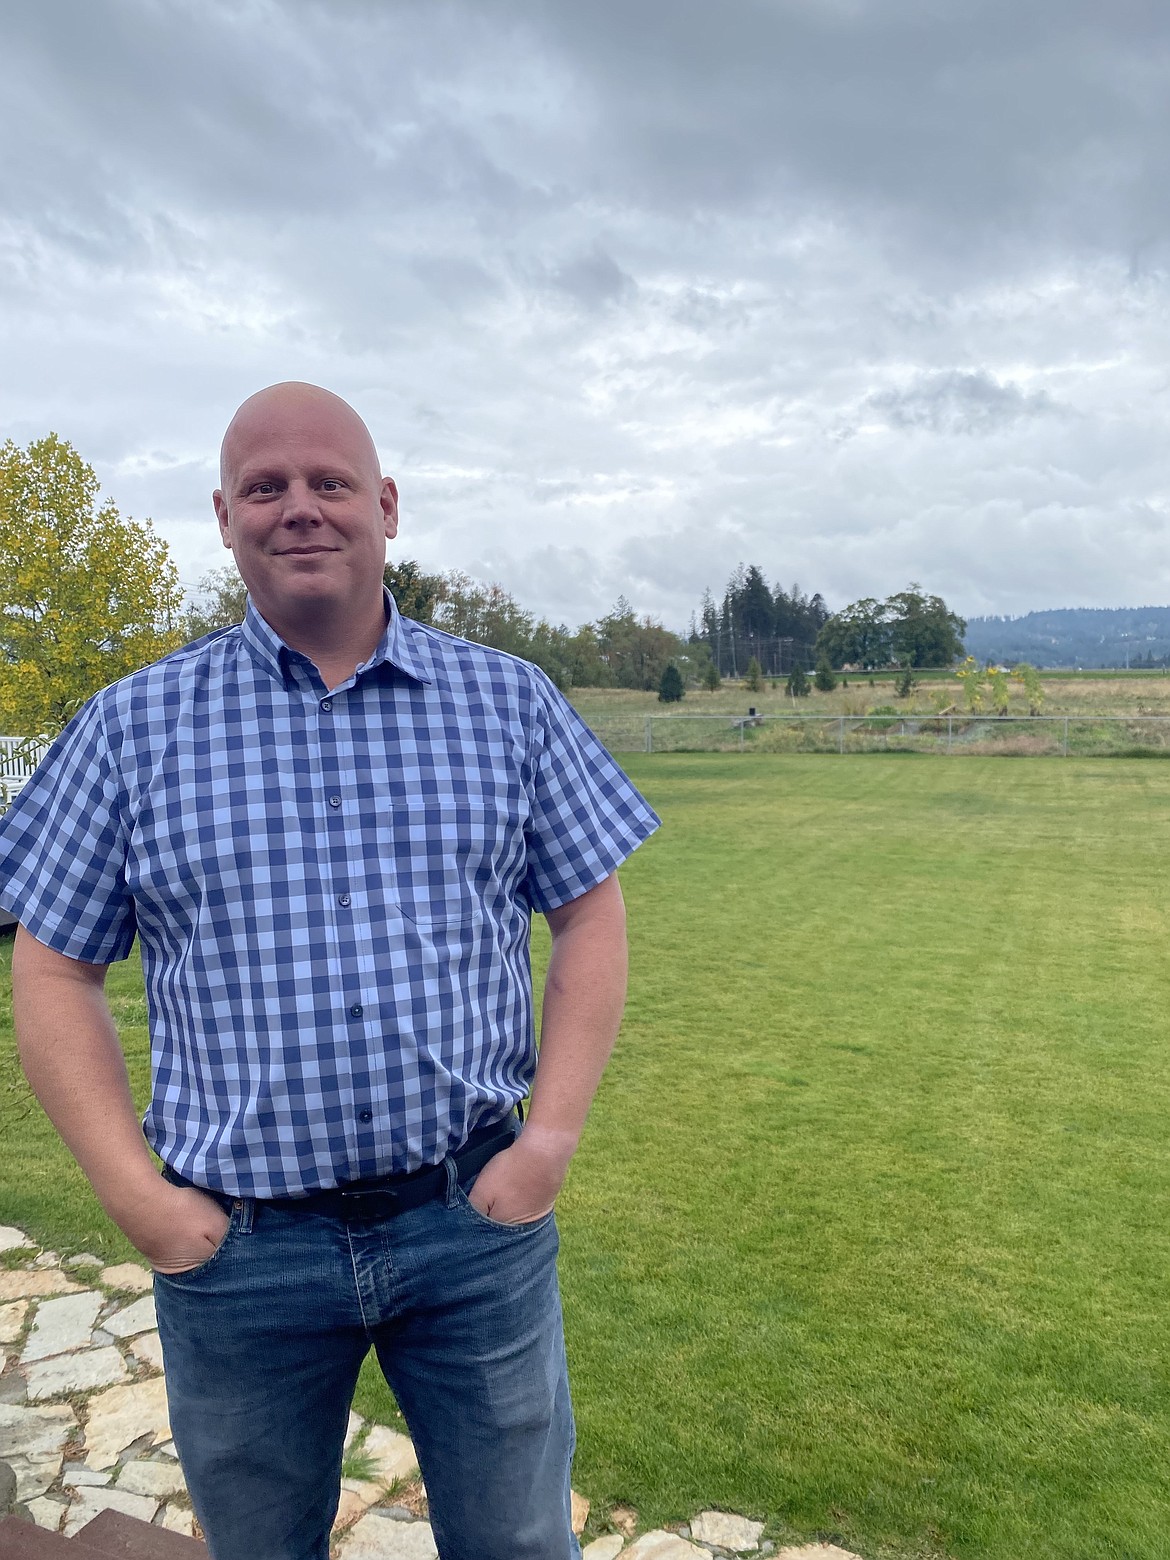 Brickert Estates resident Brian Rogers stands in front of his backyard. All of his property will be taken for the Huetter Corridor project once construction begins. A four lane highway and an expansion of Huetter to three lanes are part of the plan.